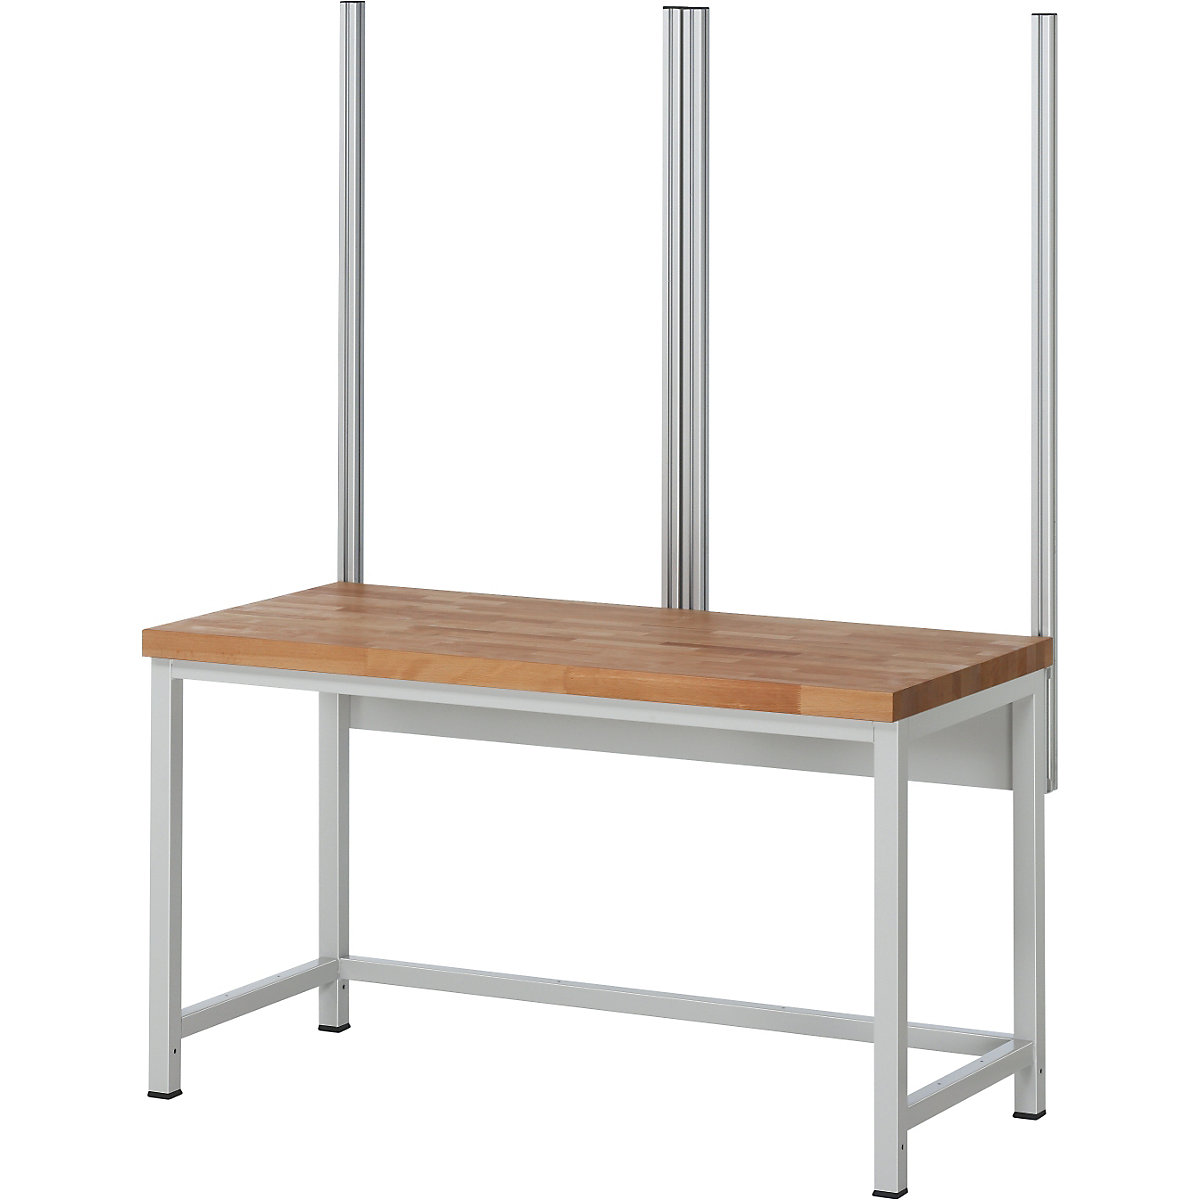 System upright set – RAU, 4 system uprights, for work table width 1500 mm